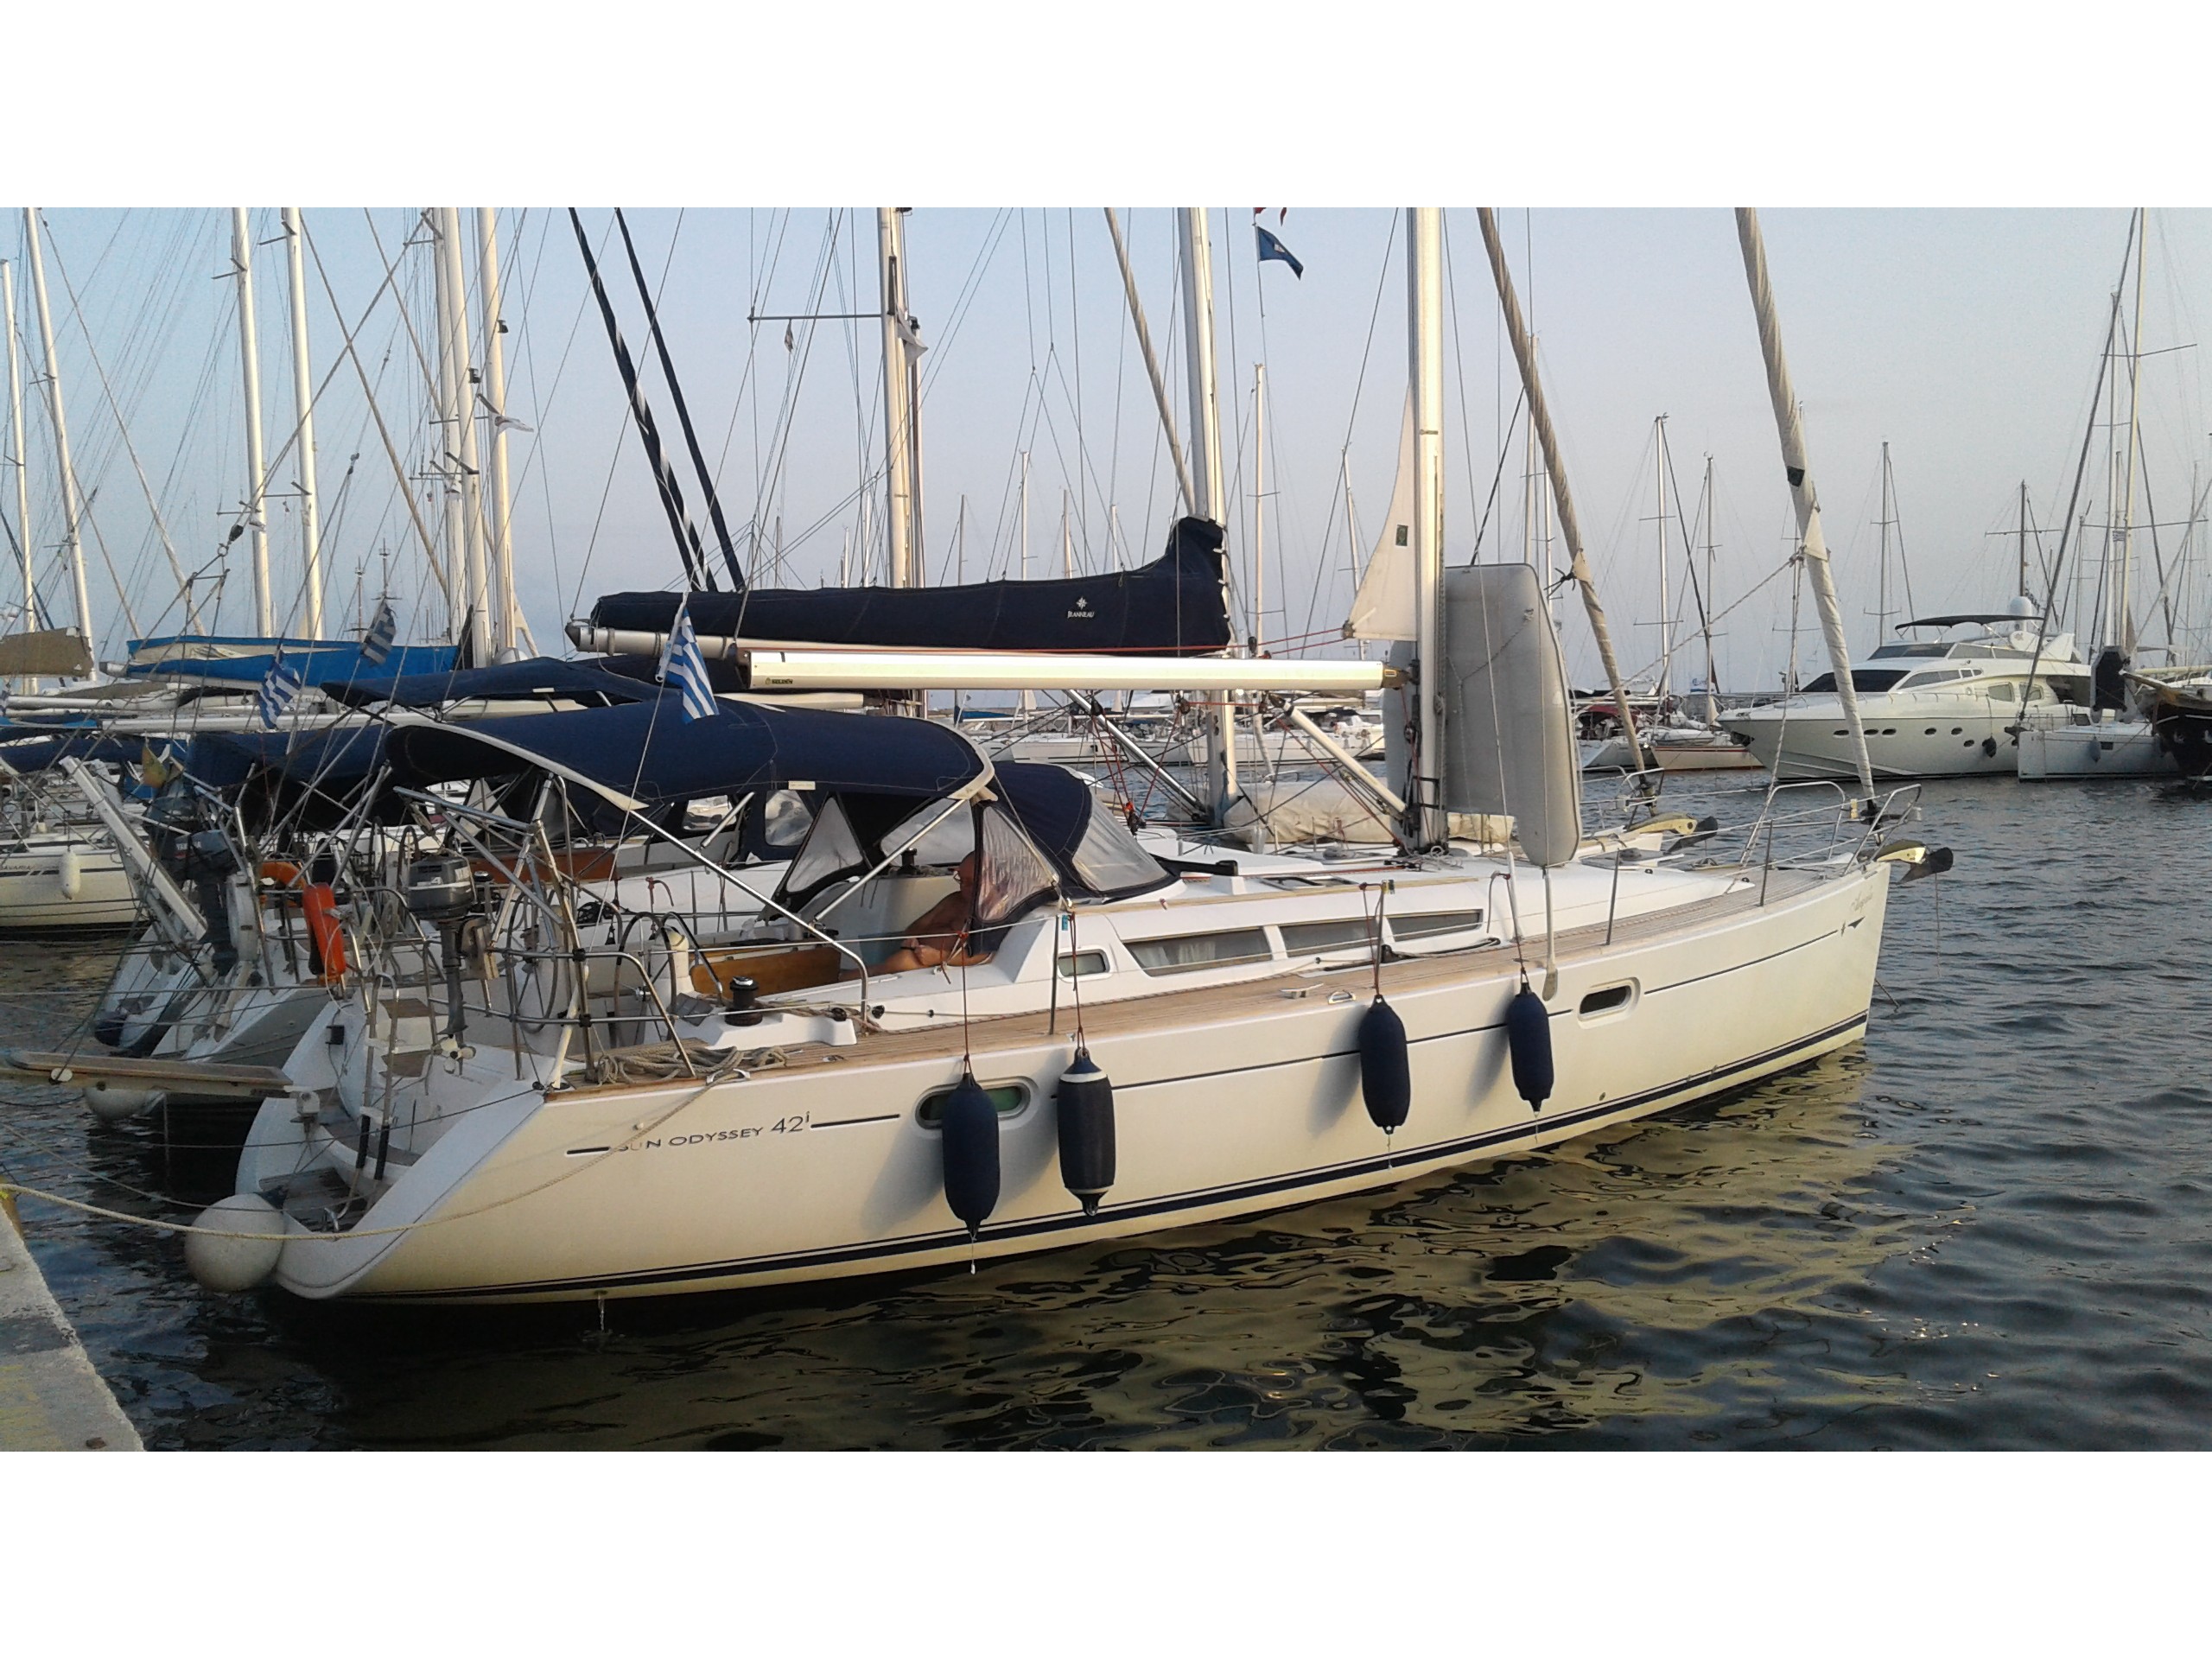 Sun Odyssey 42 i - Yacht Charter Pointe-à-Pître & Boat hire in Greece Athens and Saronic Gulf Athens Alimos Alimos Marina 2